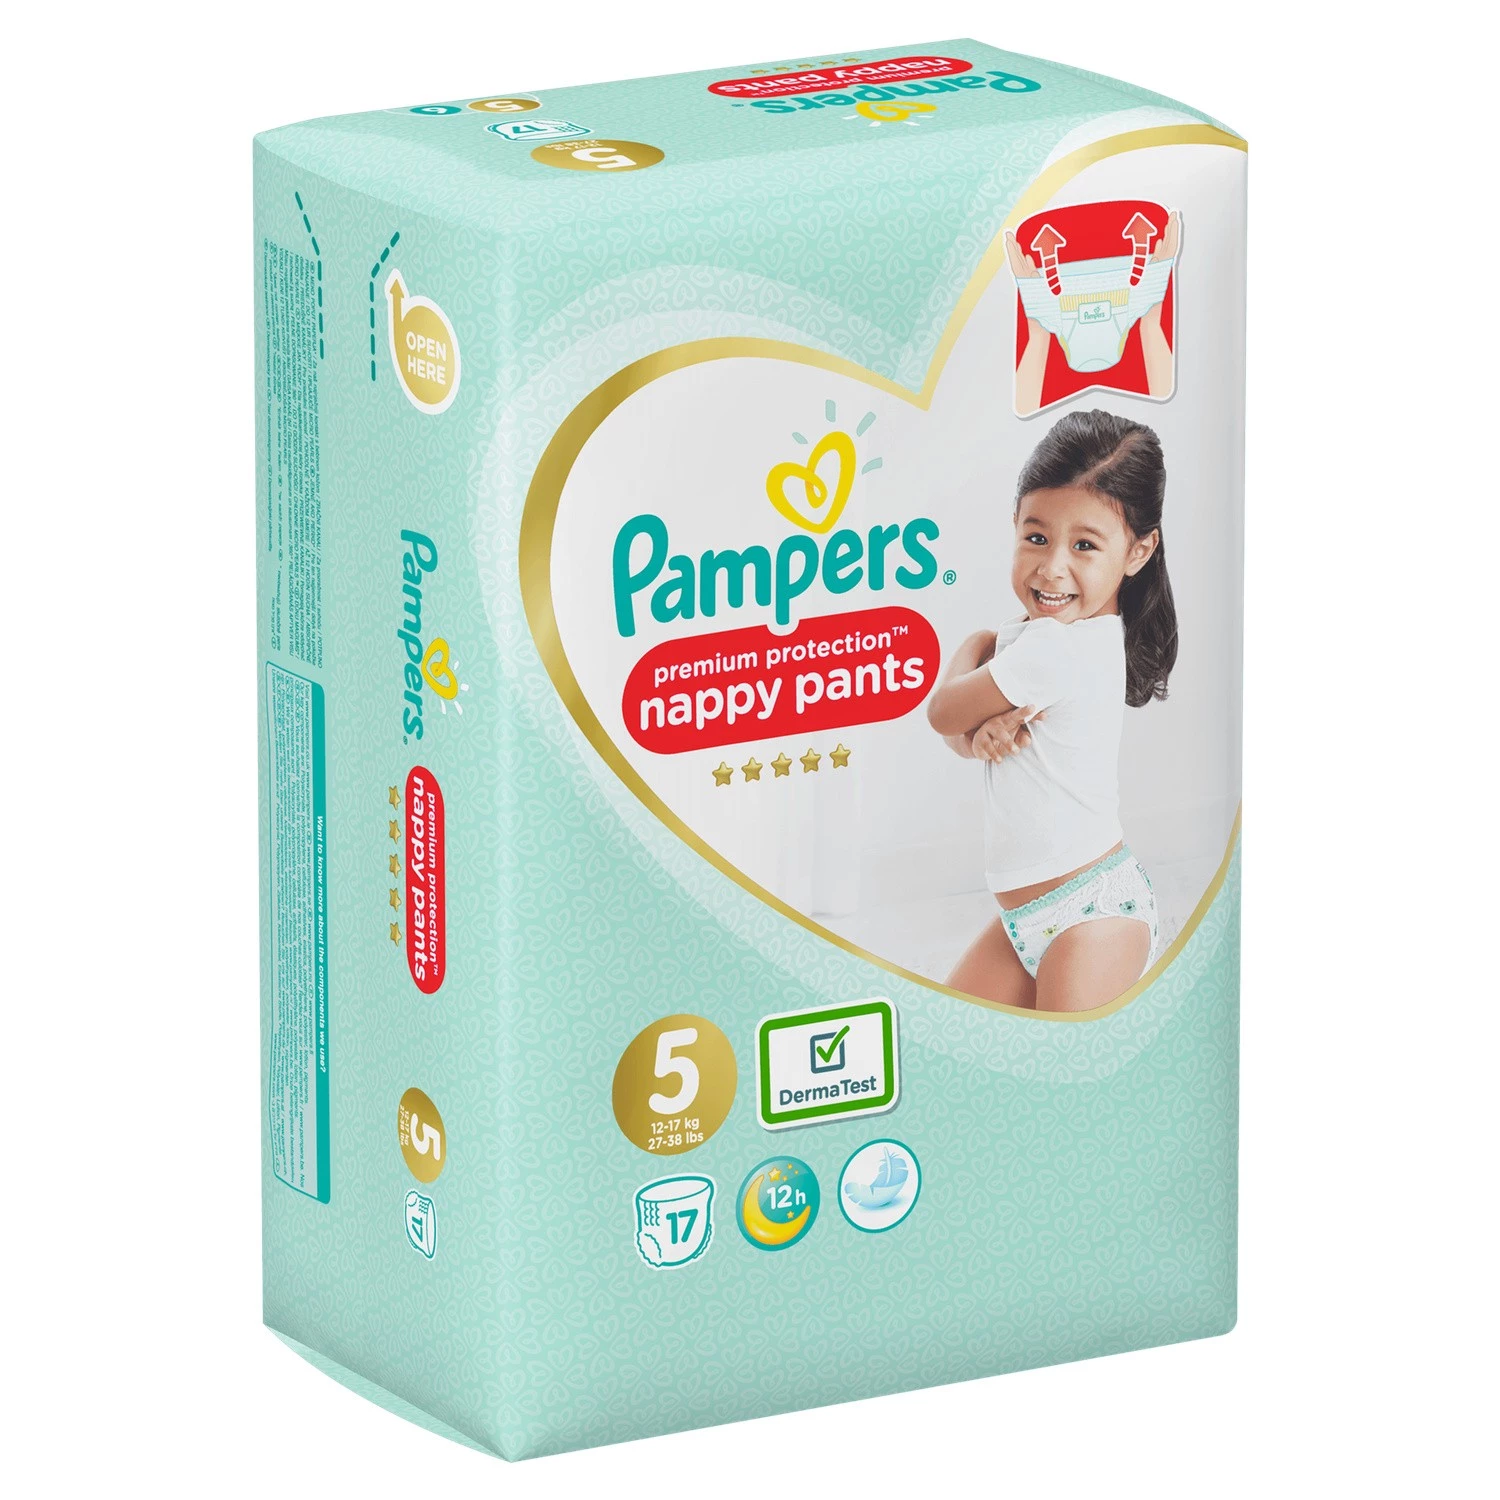 Baby diapers nappy pants T5 x 17 - PAMPERS